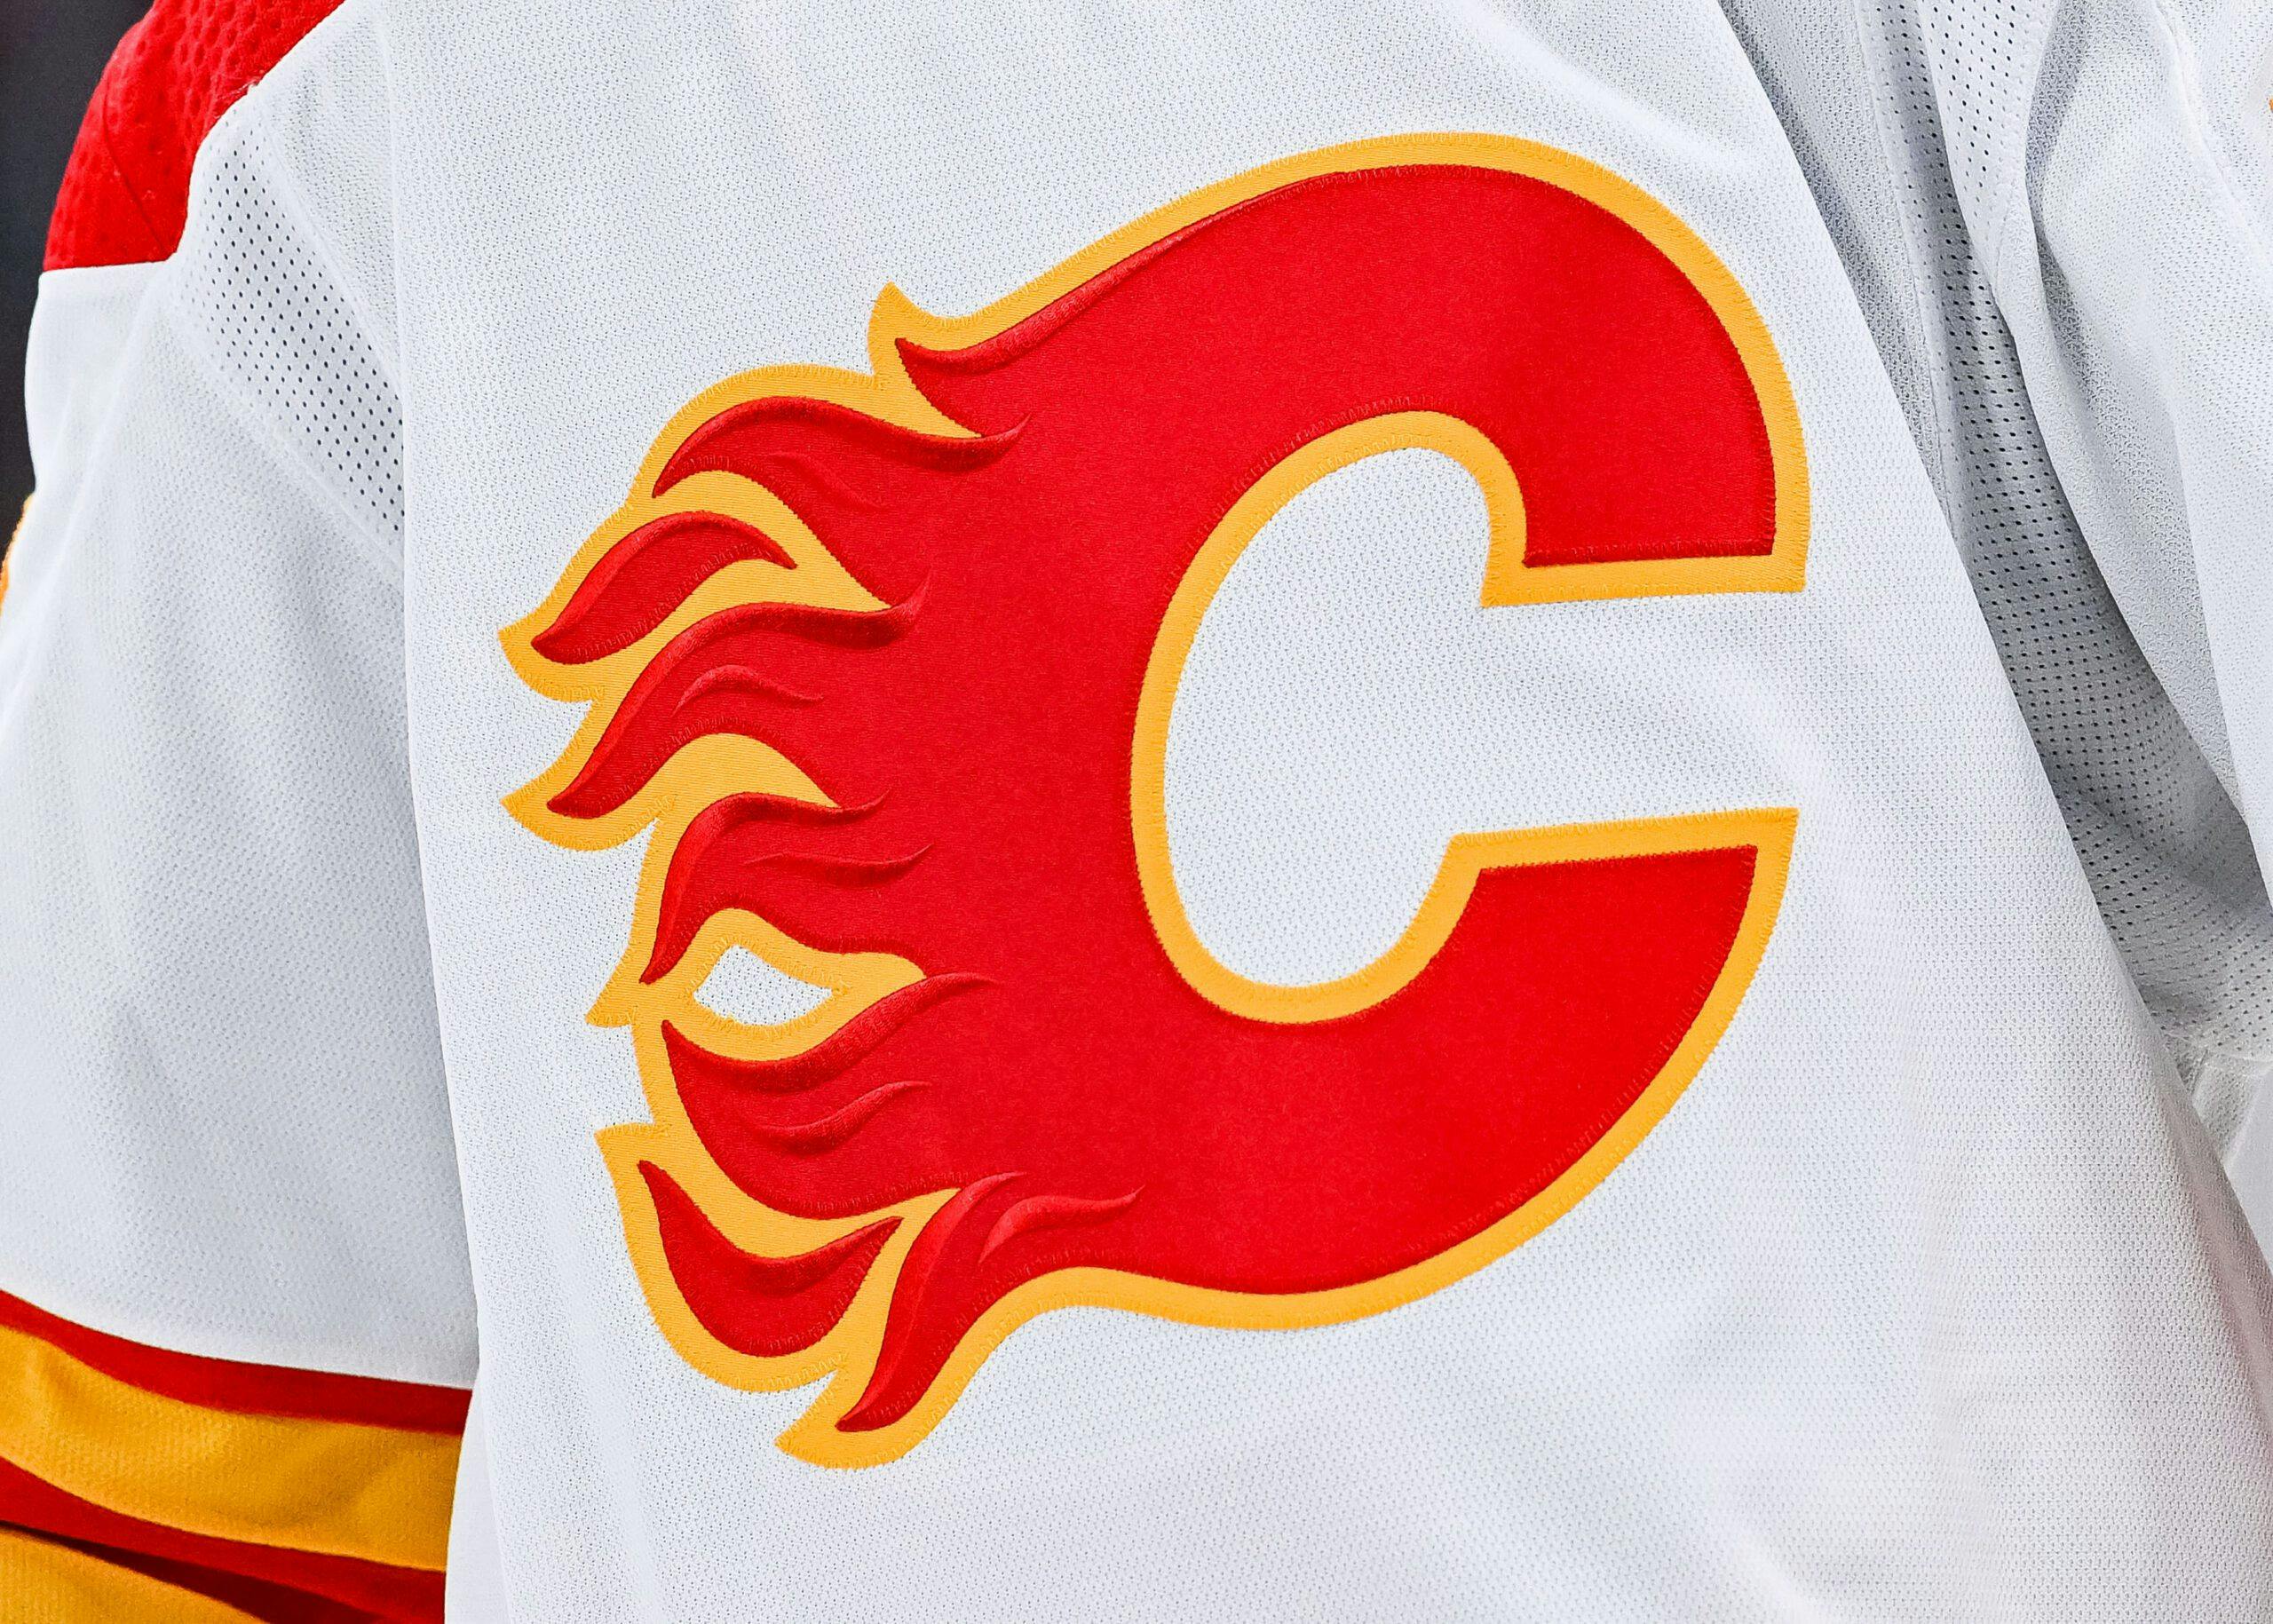 Calgary Flames say they ‘had no knowledge’ of Dillon Dube’s pending charges before granting leave